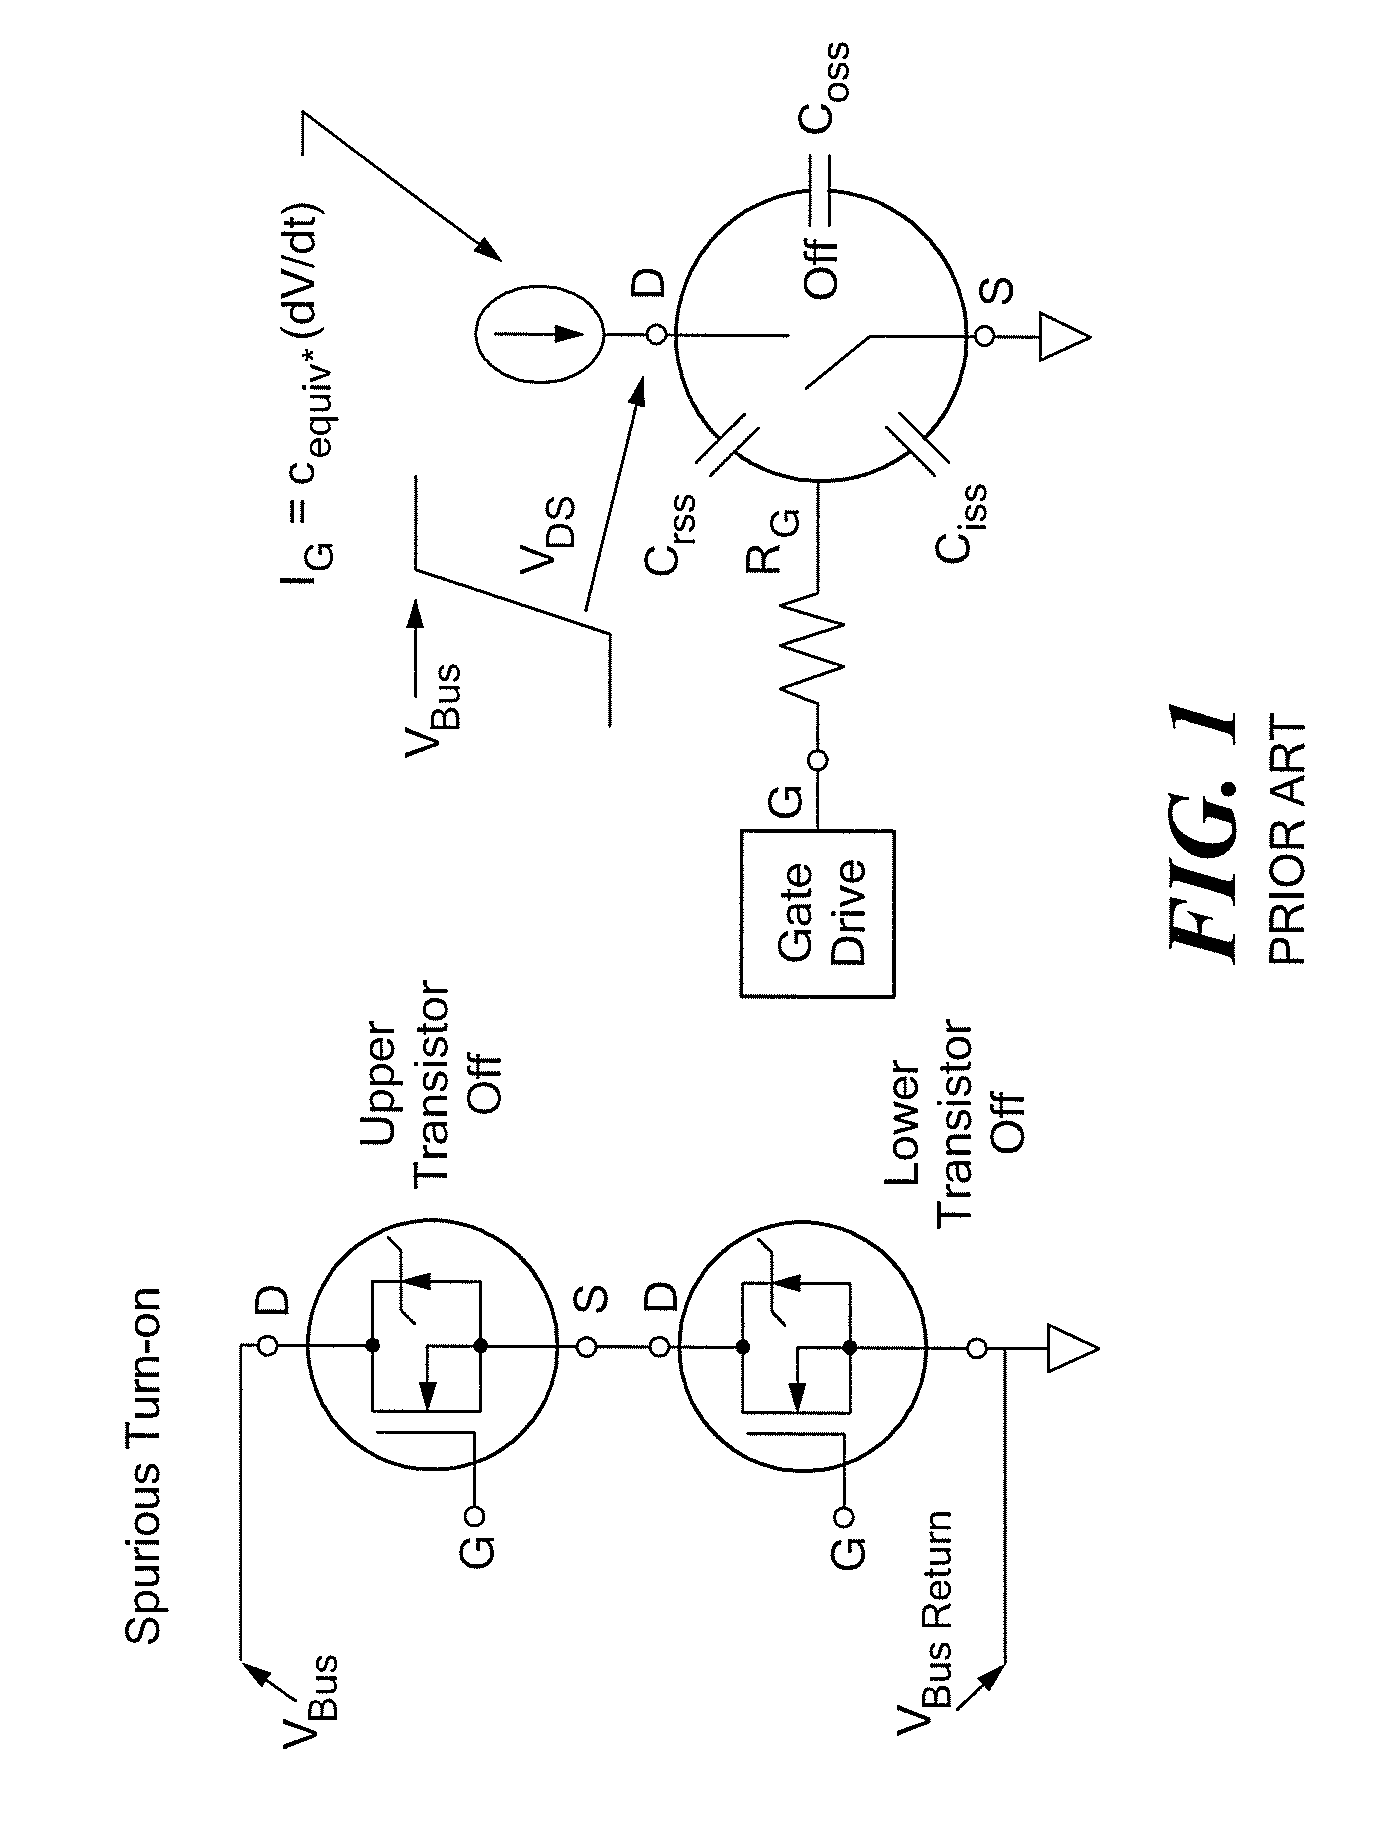 Methods and apparatus for a cascade converter using series resonant cells with zero voltage switching